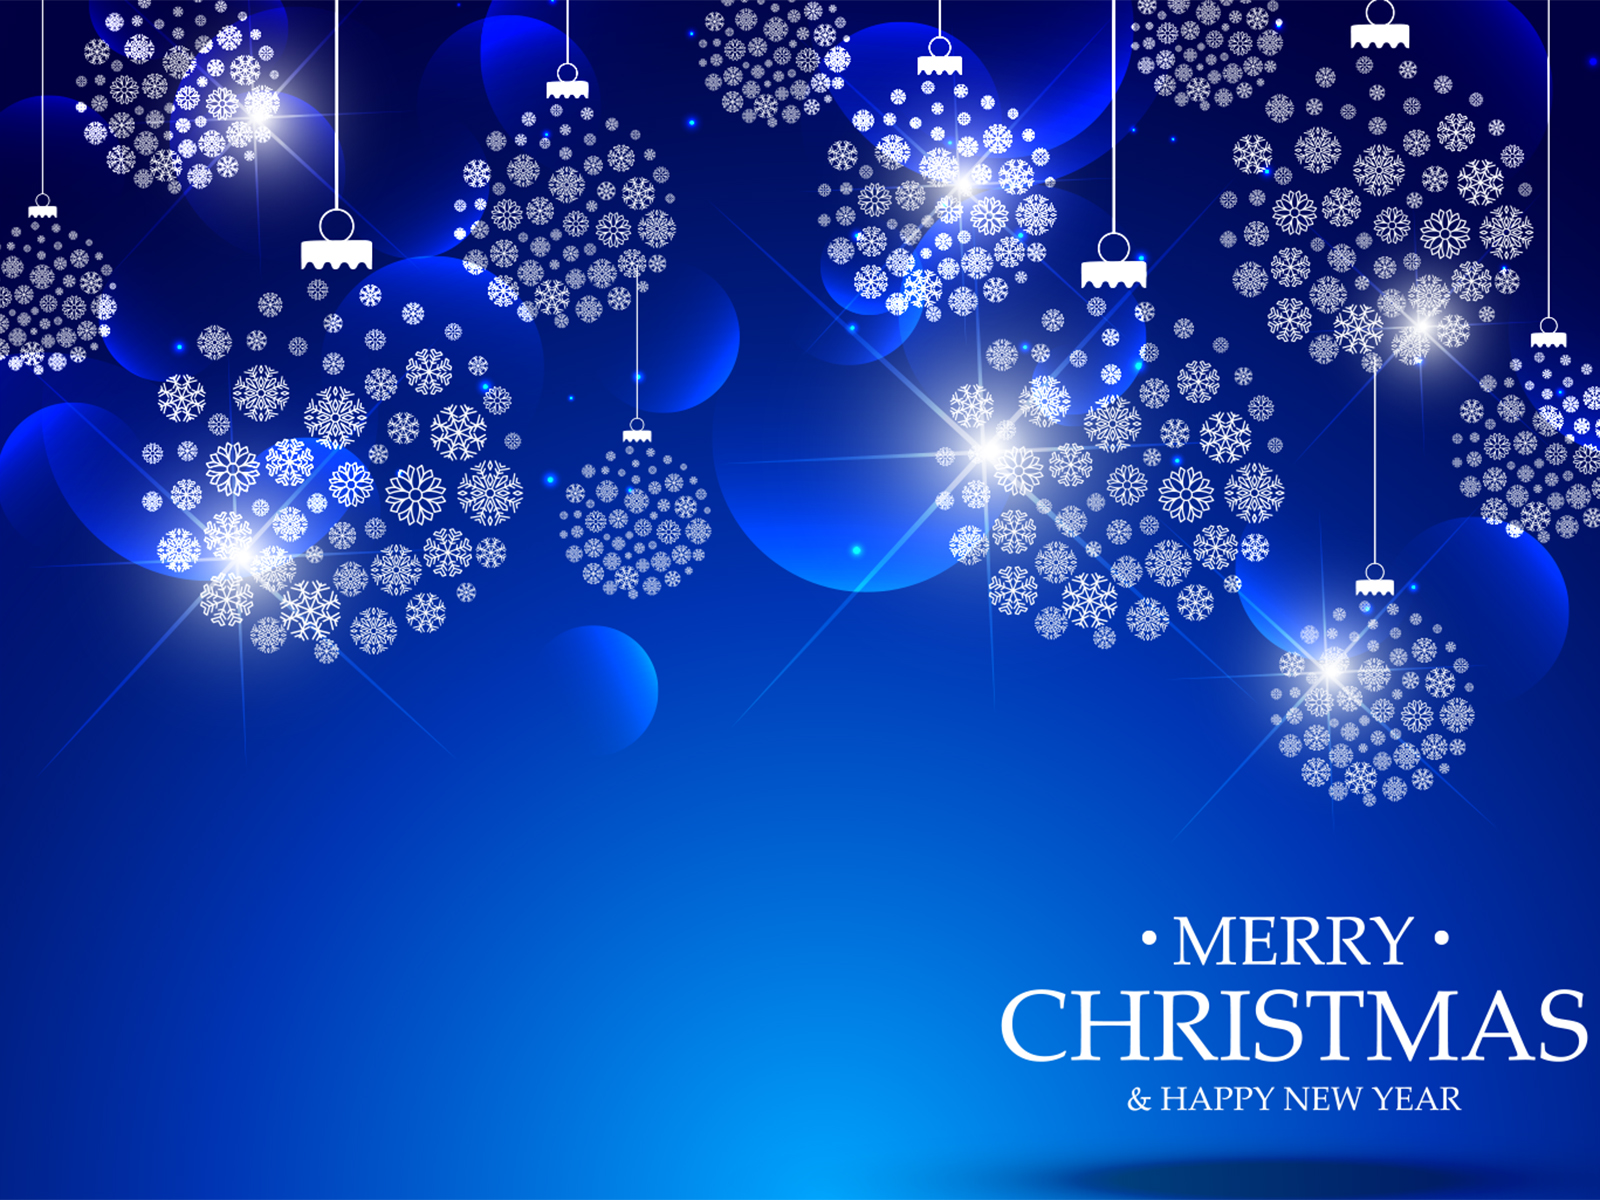 Blue Merry Christmas Backgrounds | Blue, Christmas, Holiday Templates |  Free PPT Grounds